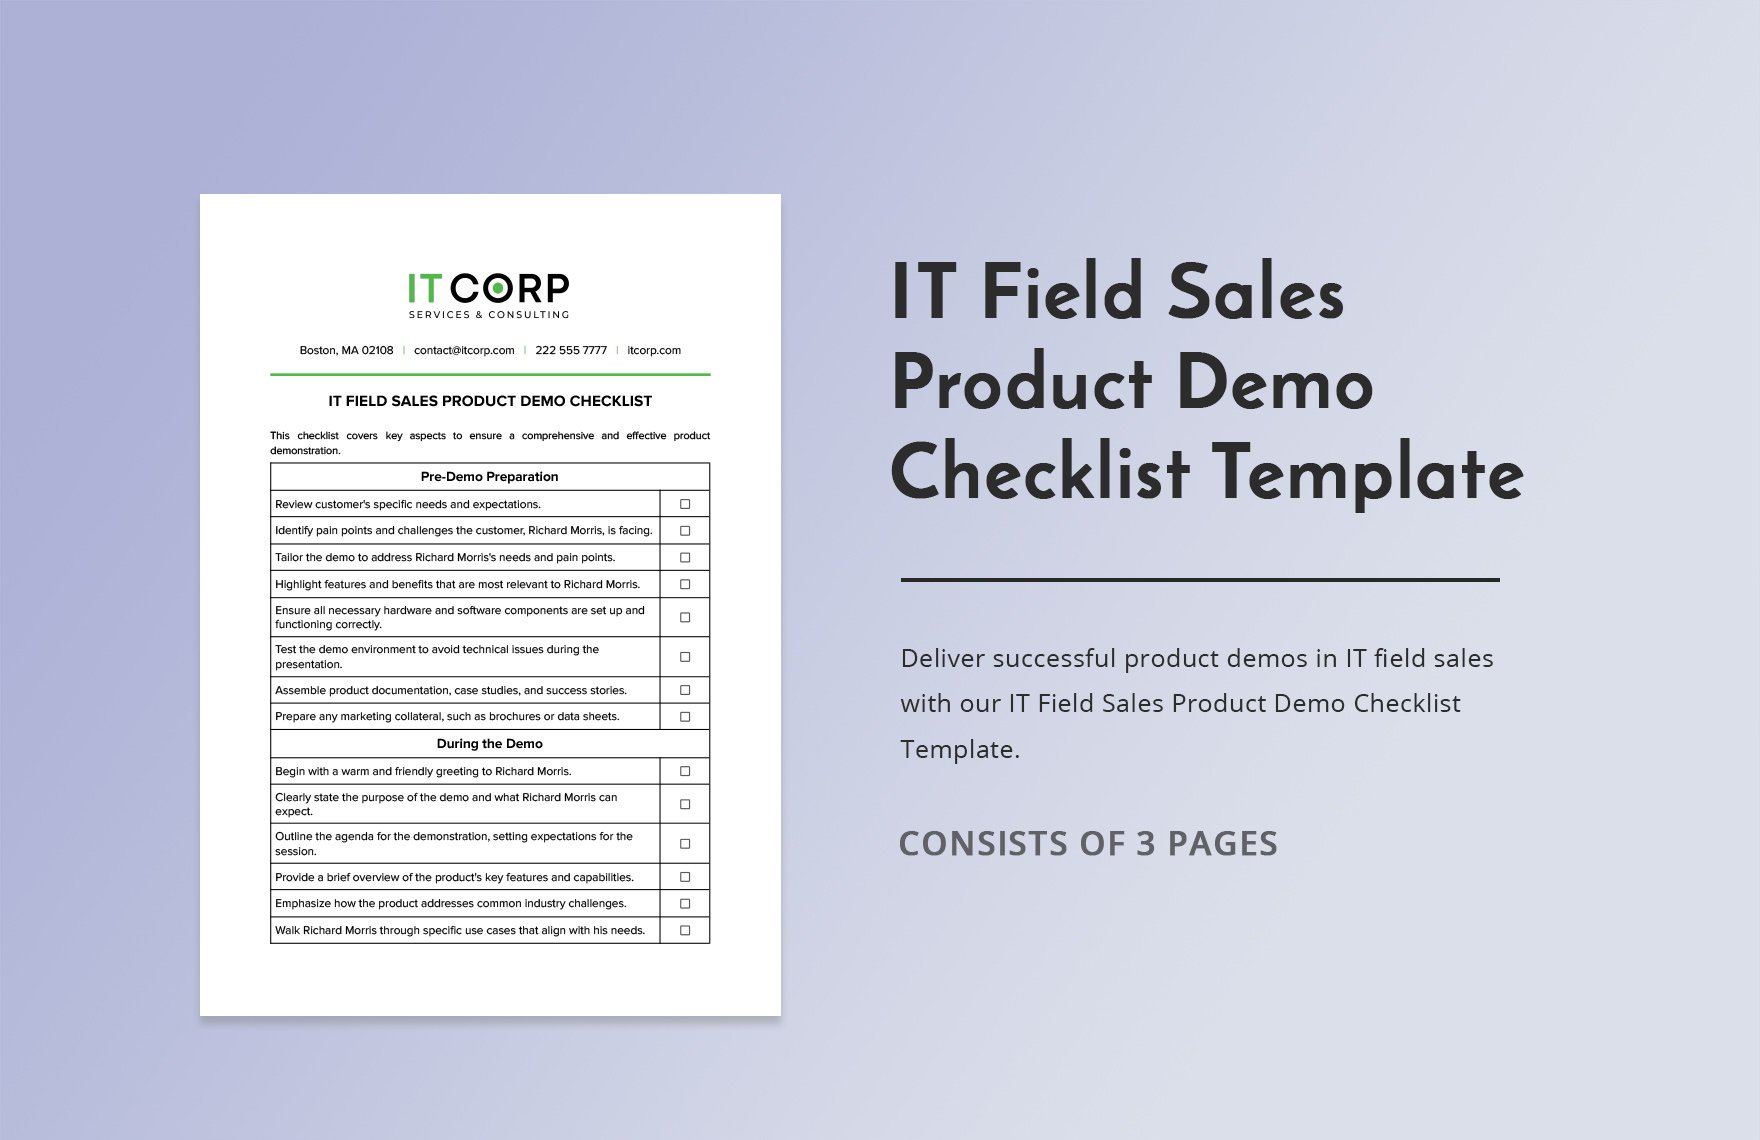 IT Field Sales Product Demo Checklist Template in Word, Google Docs, PDF